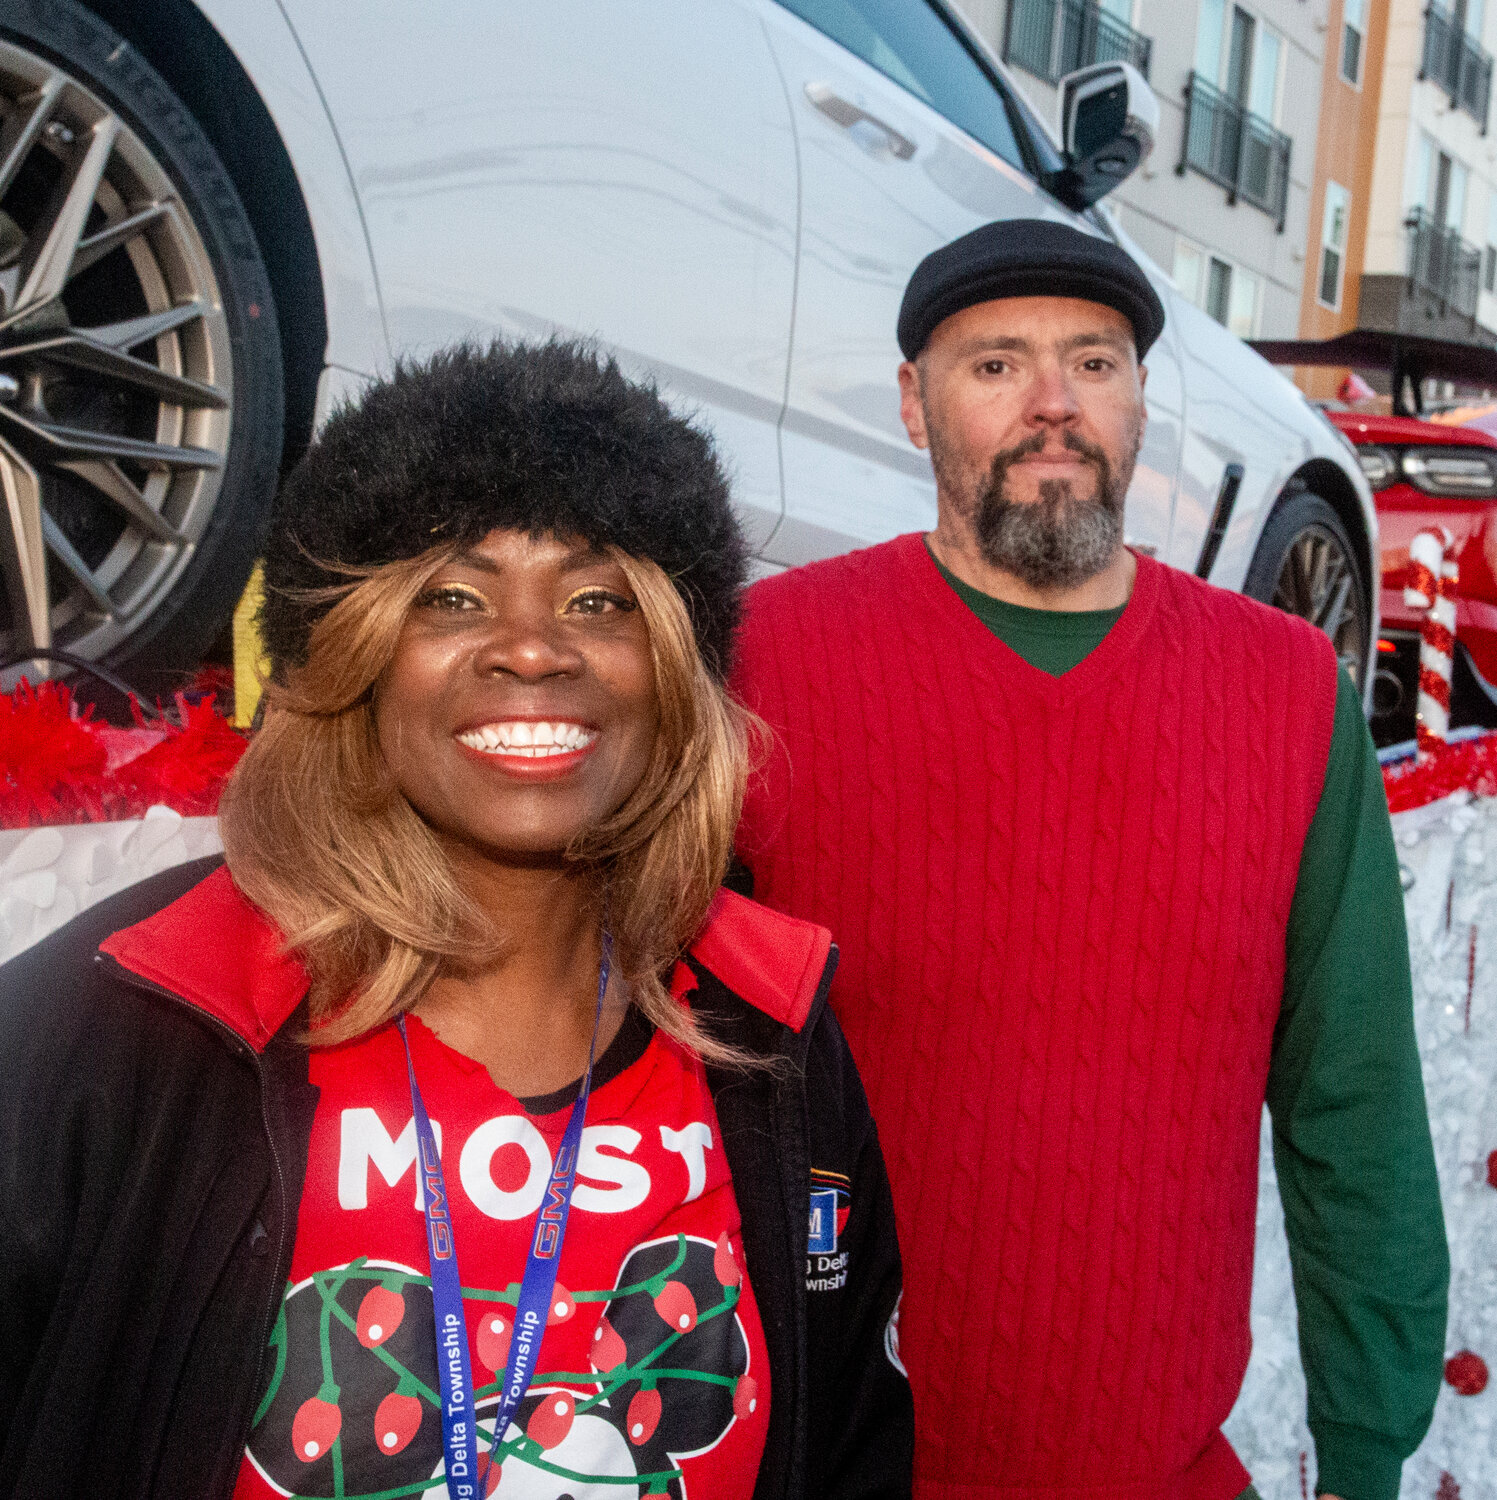 Melissa Hall (left) of General Motors and Ron Eddington of Jack Cooper, the company that hauled GM’s vehicles for the event, in front of a parade float lined with sparkly new GM cars.